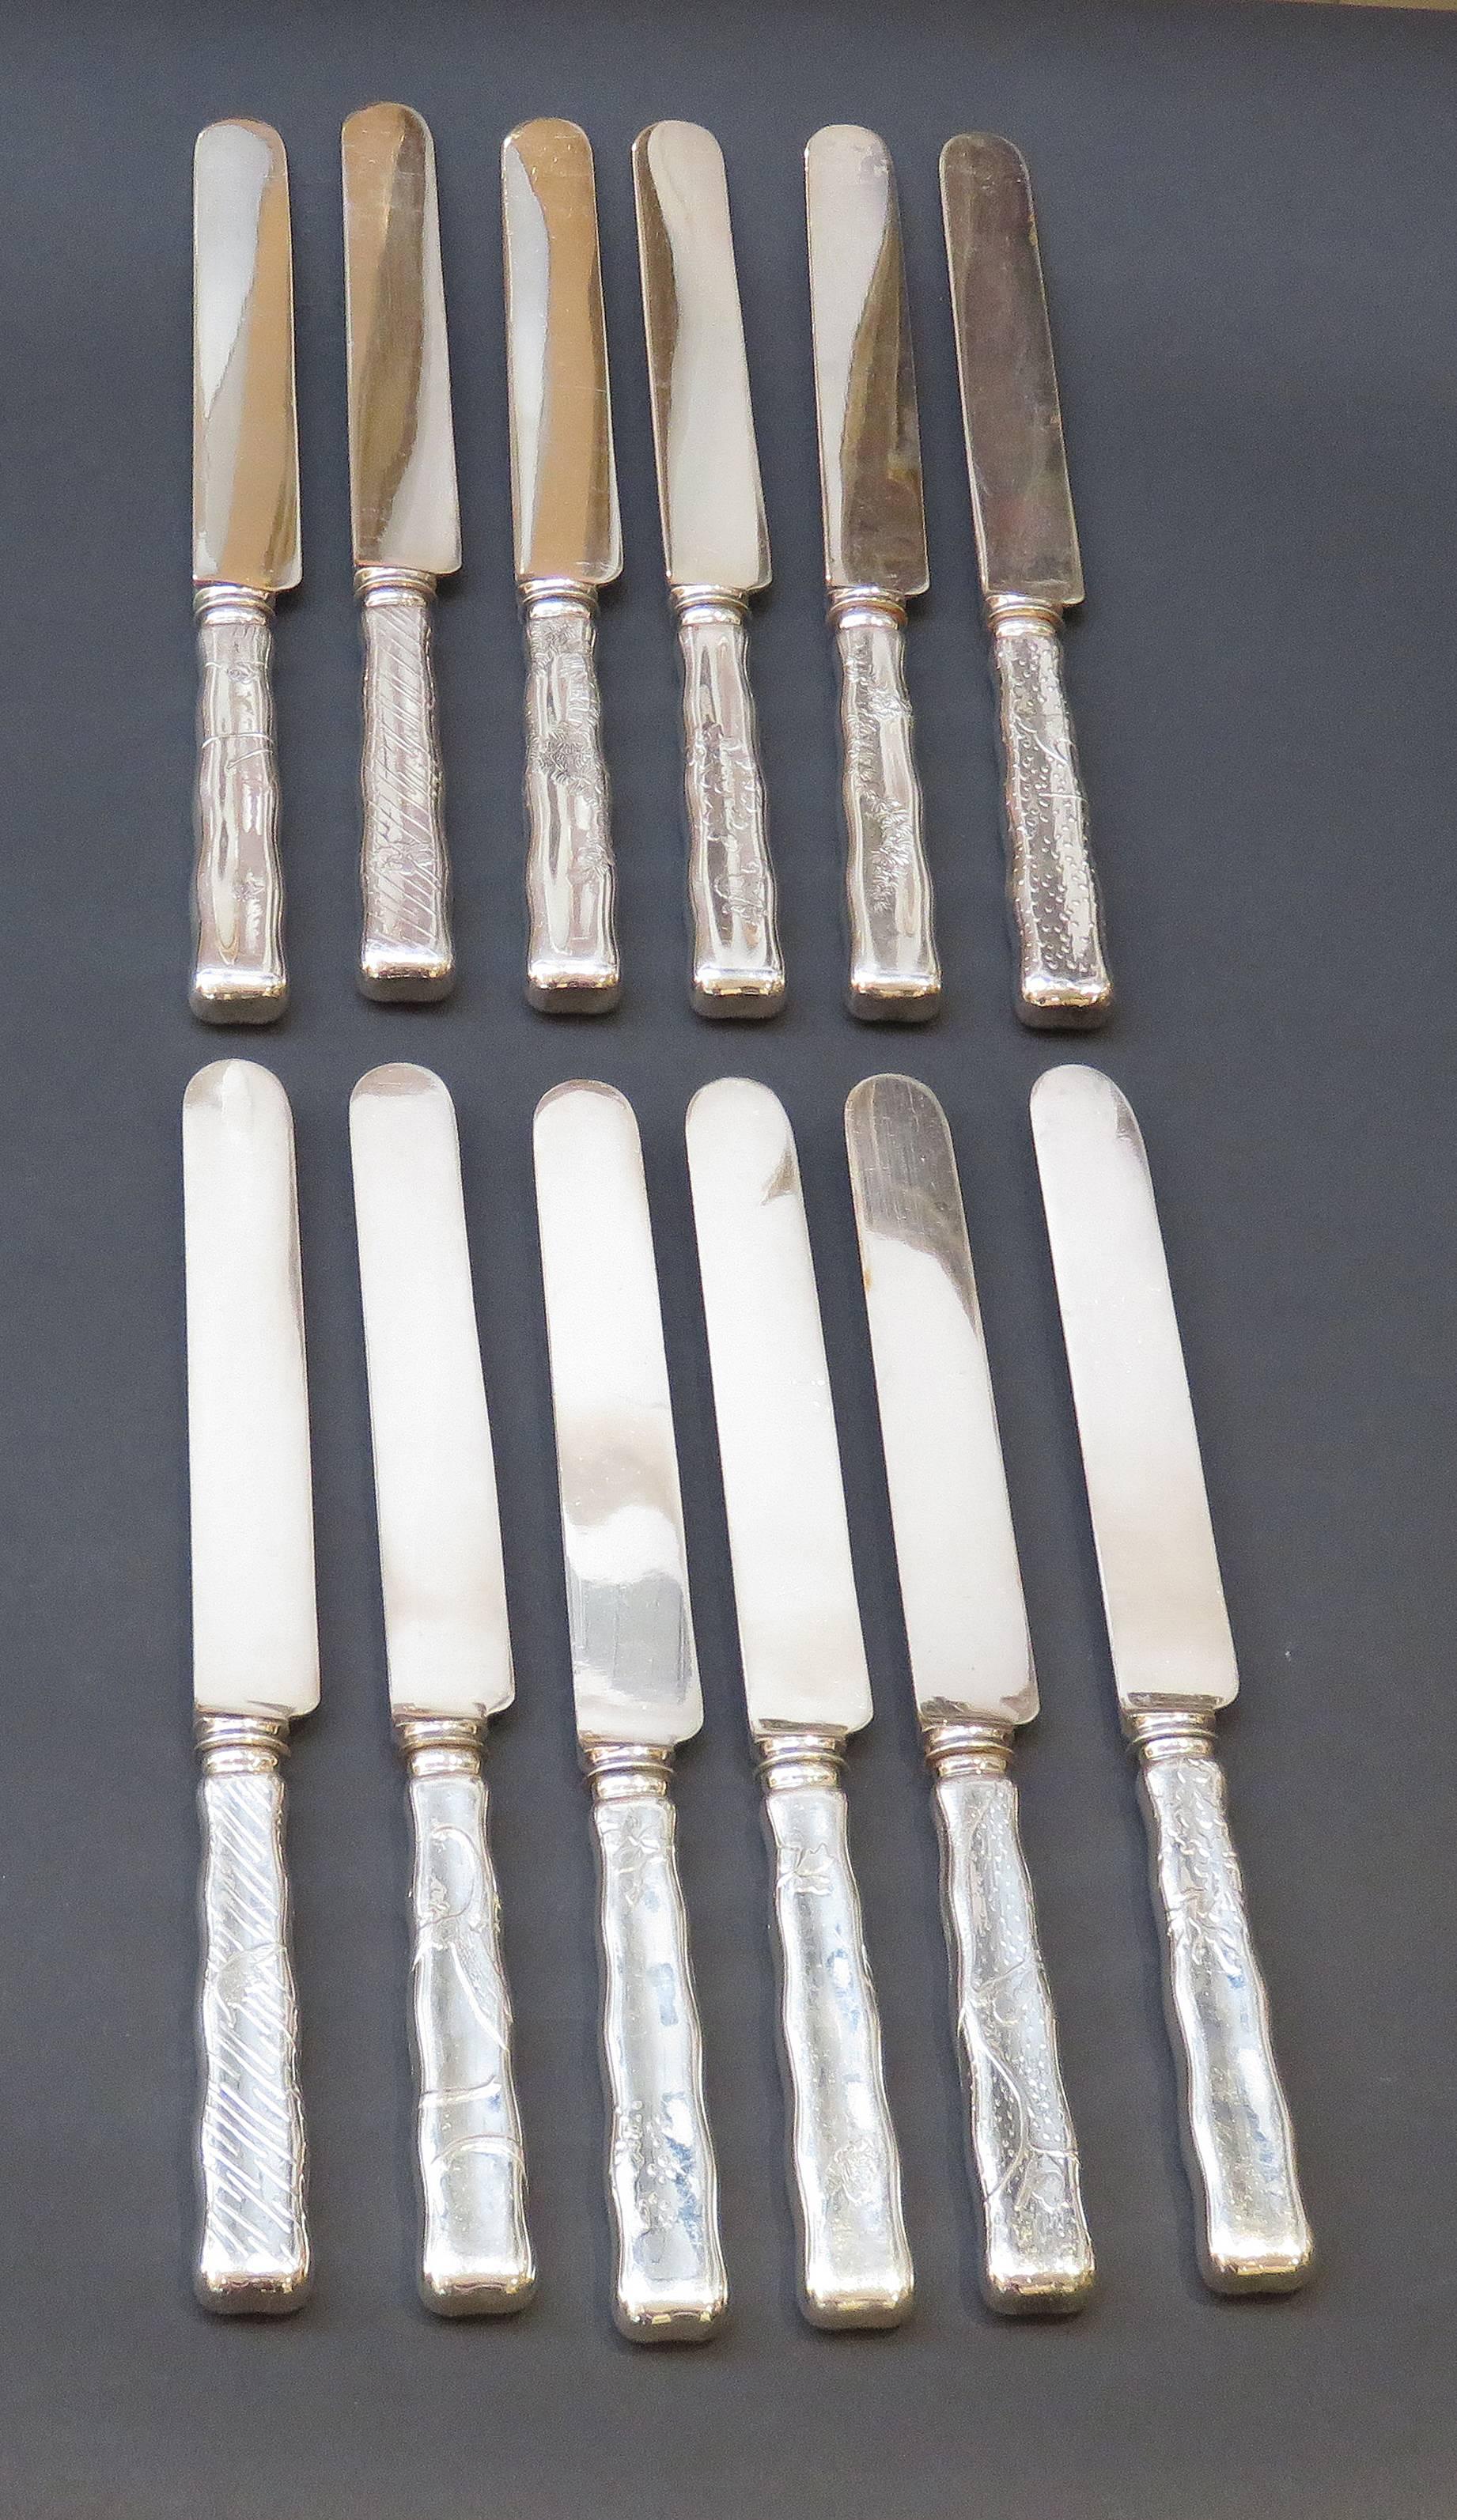 A set of 12 Tiffany & Company lap over edge acid etched hollow handled dinner knives. Each handle is etched with different sea life, fruit, plants and flowers. The blades of these knives are marked Tiffany & Co New York. The handles are marked